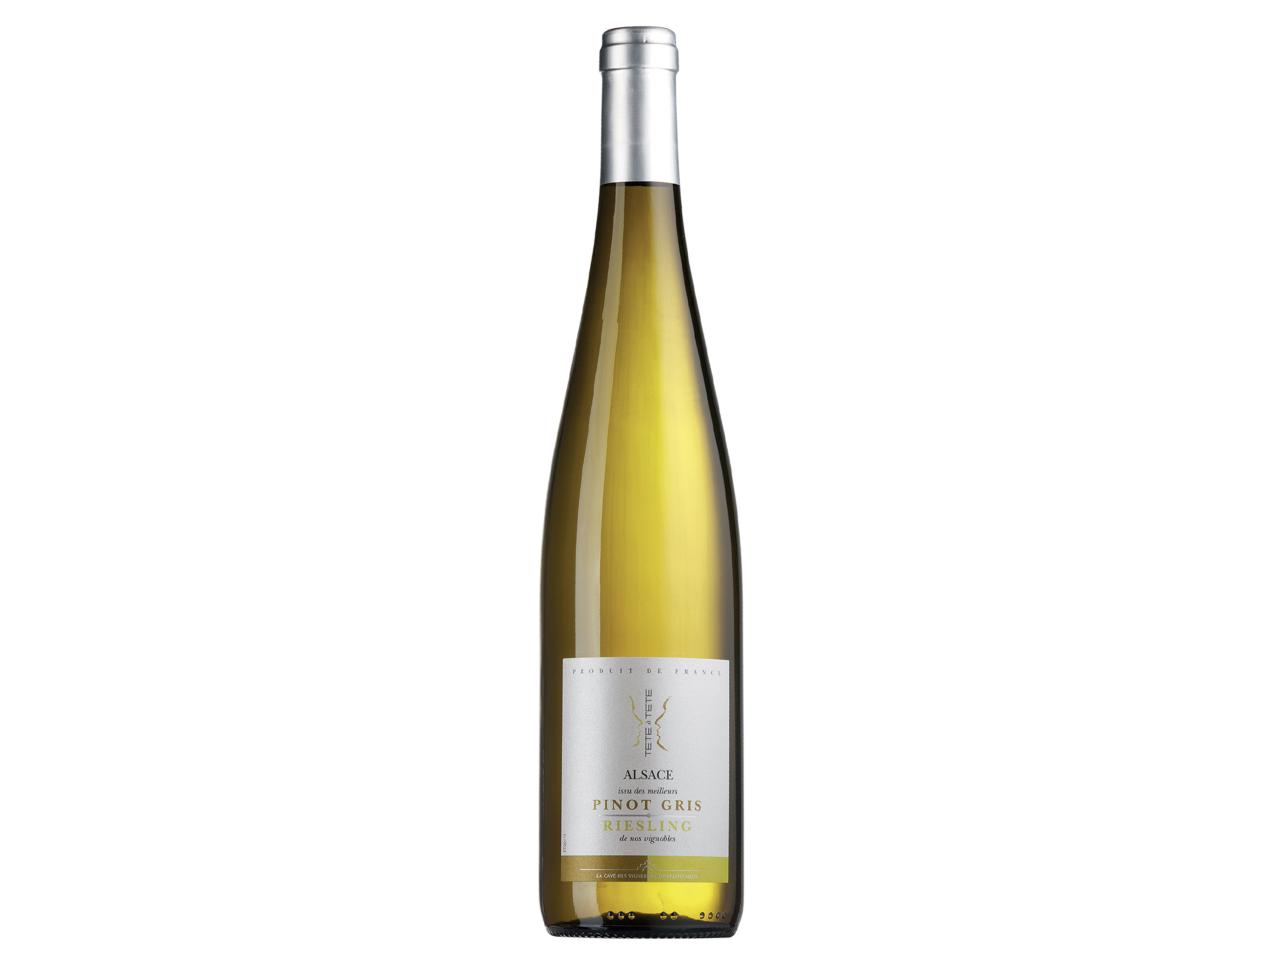 Alsace Riesling Pinot Gris1